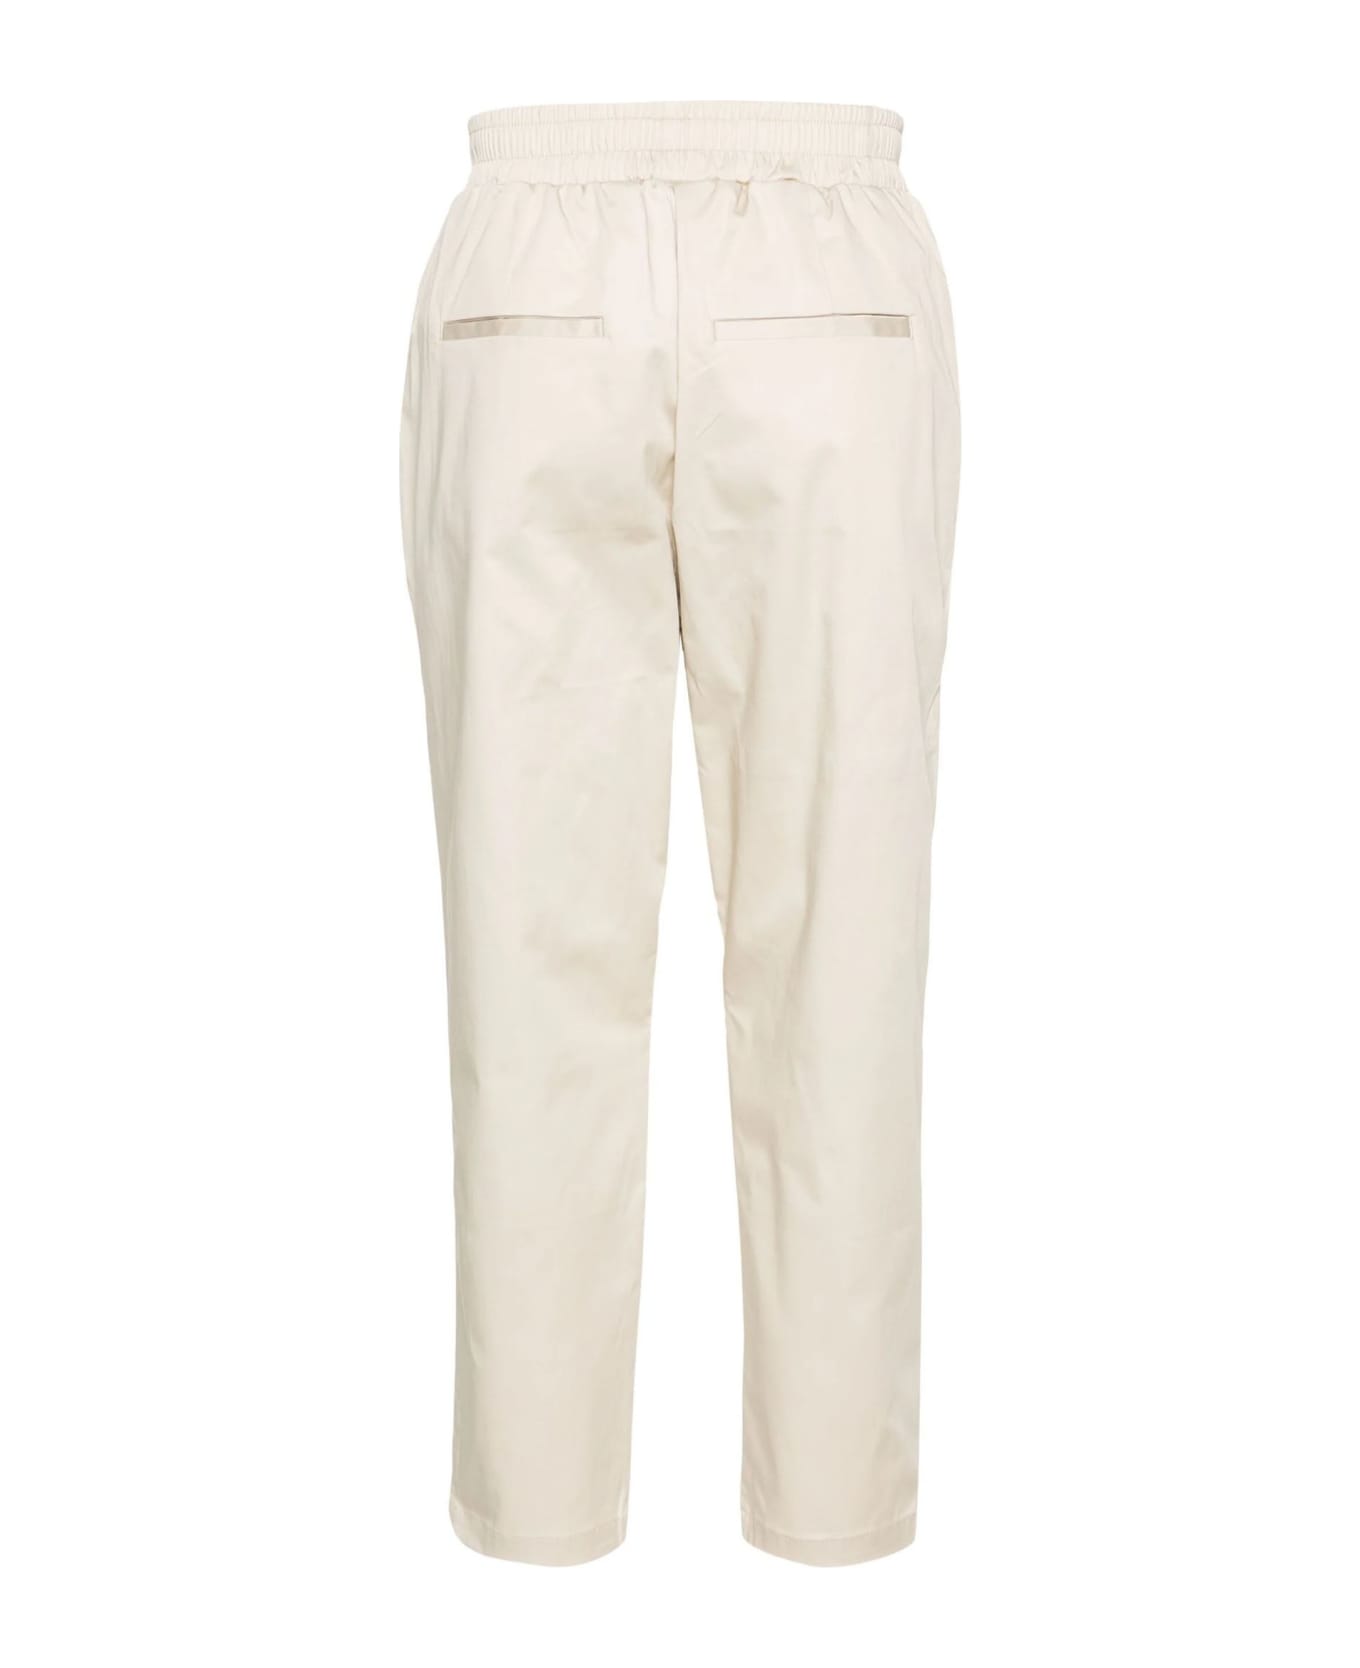 Family First Milano Family First Trousers White - White